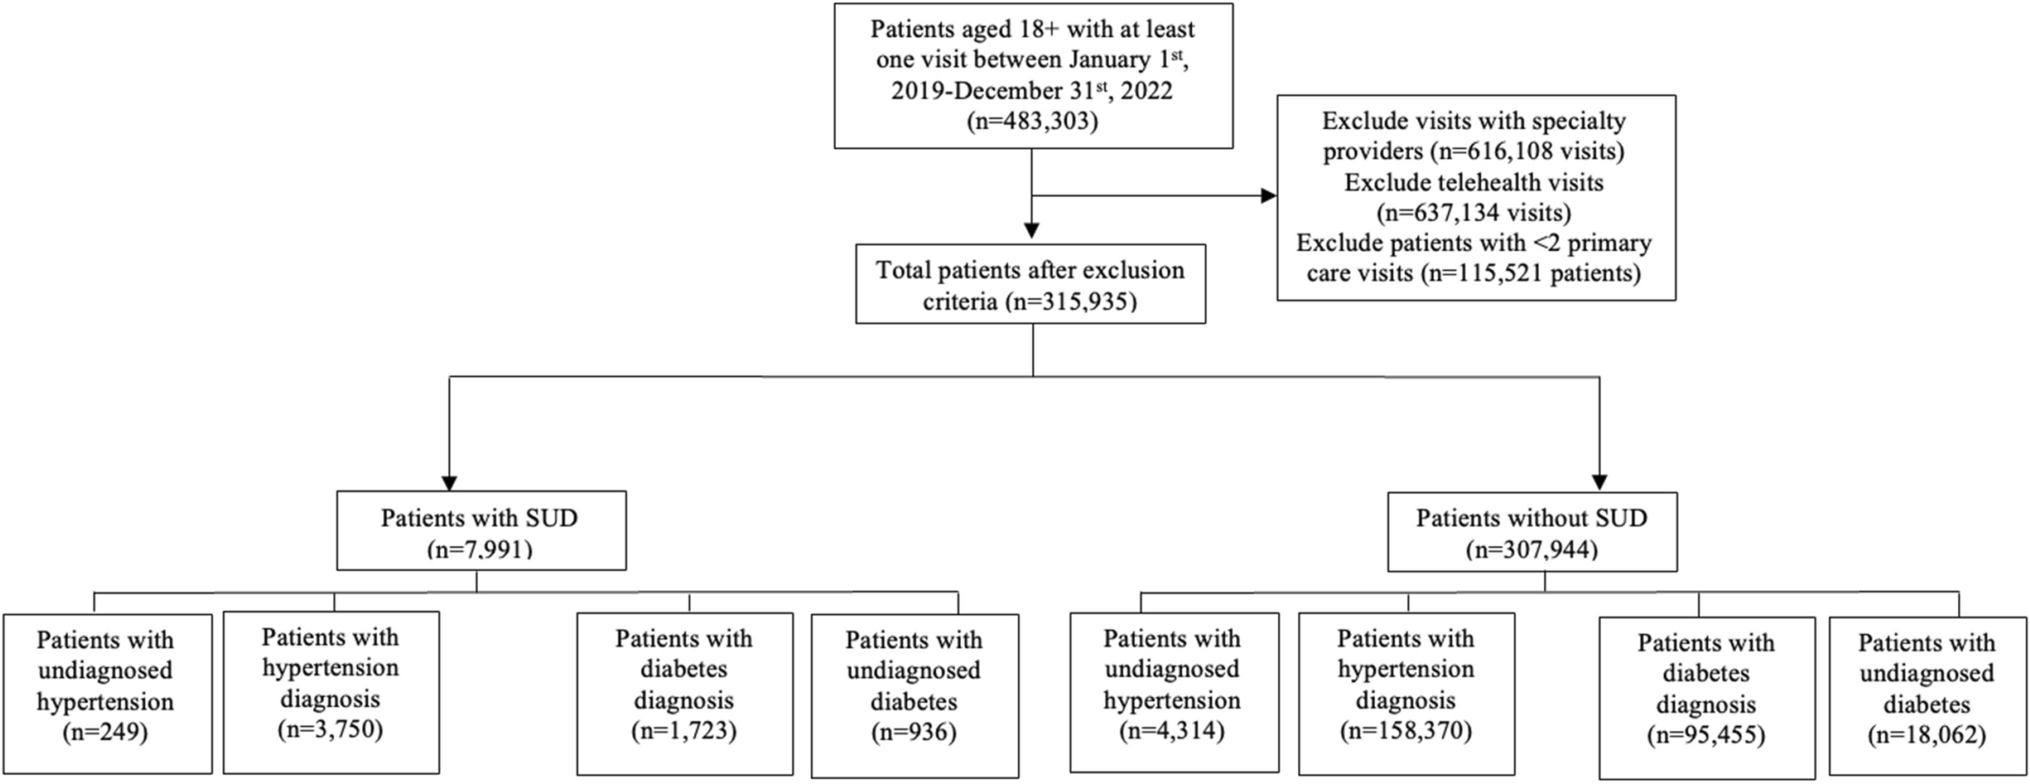 Comparing Rates of Undiagnosed Hypertension and Diabetes in Patients With and Without Substance Use Disorders